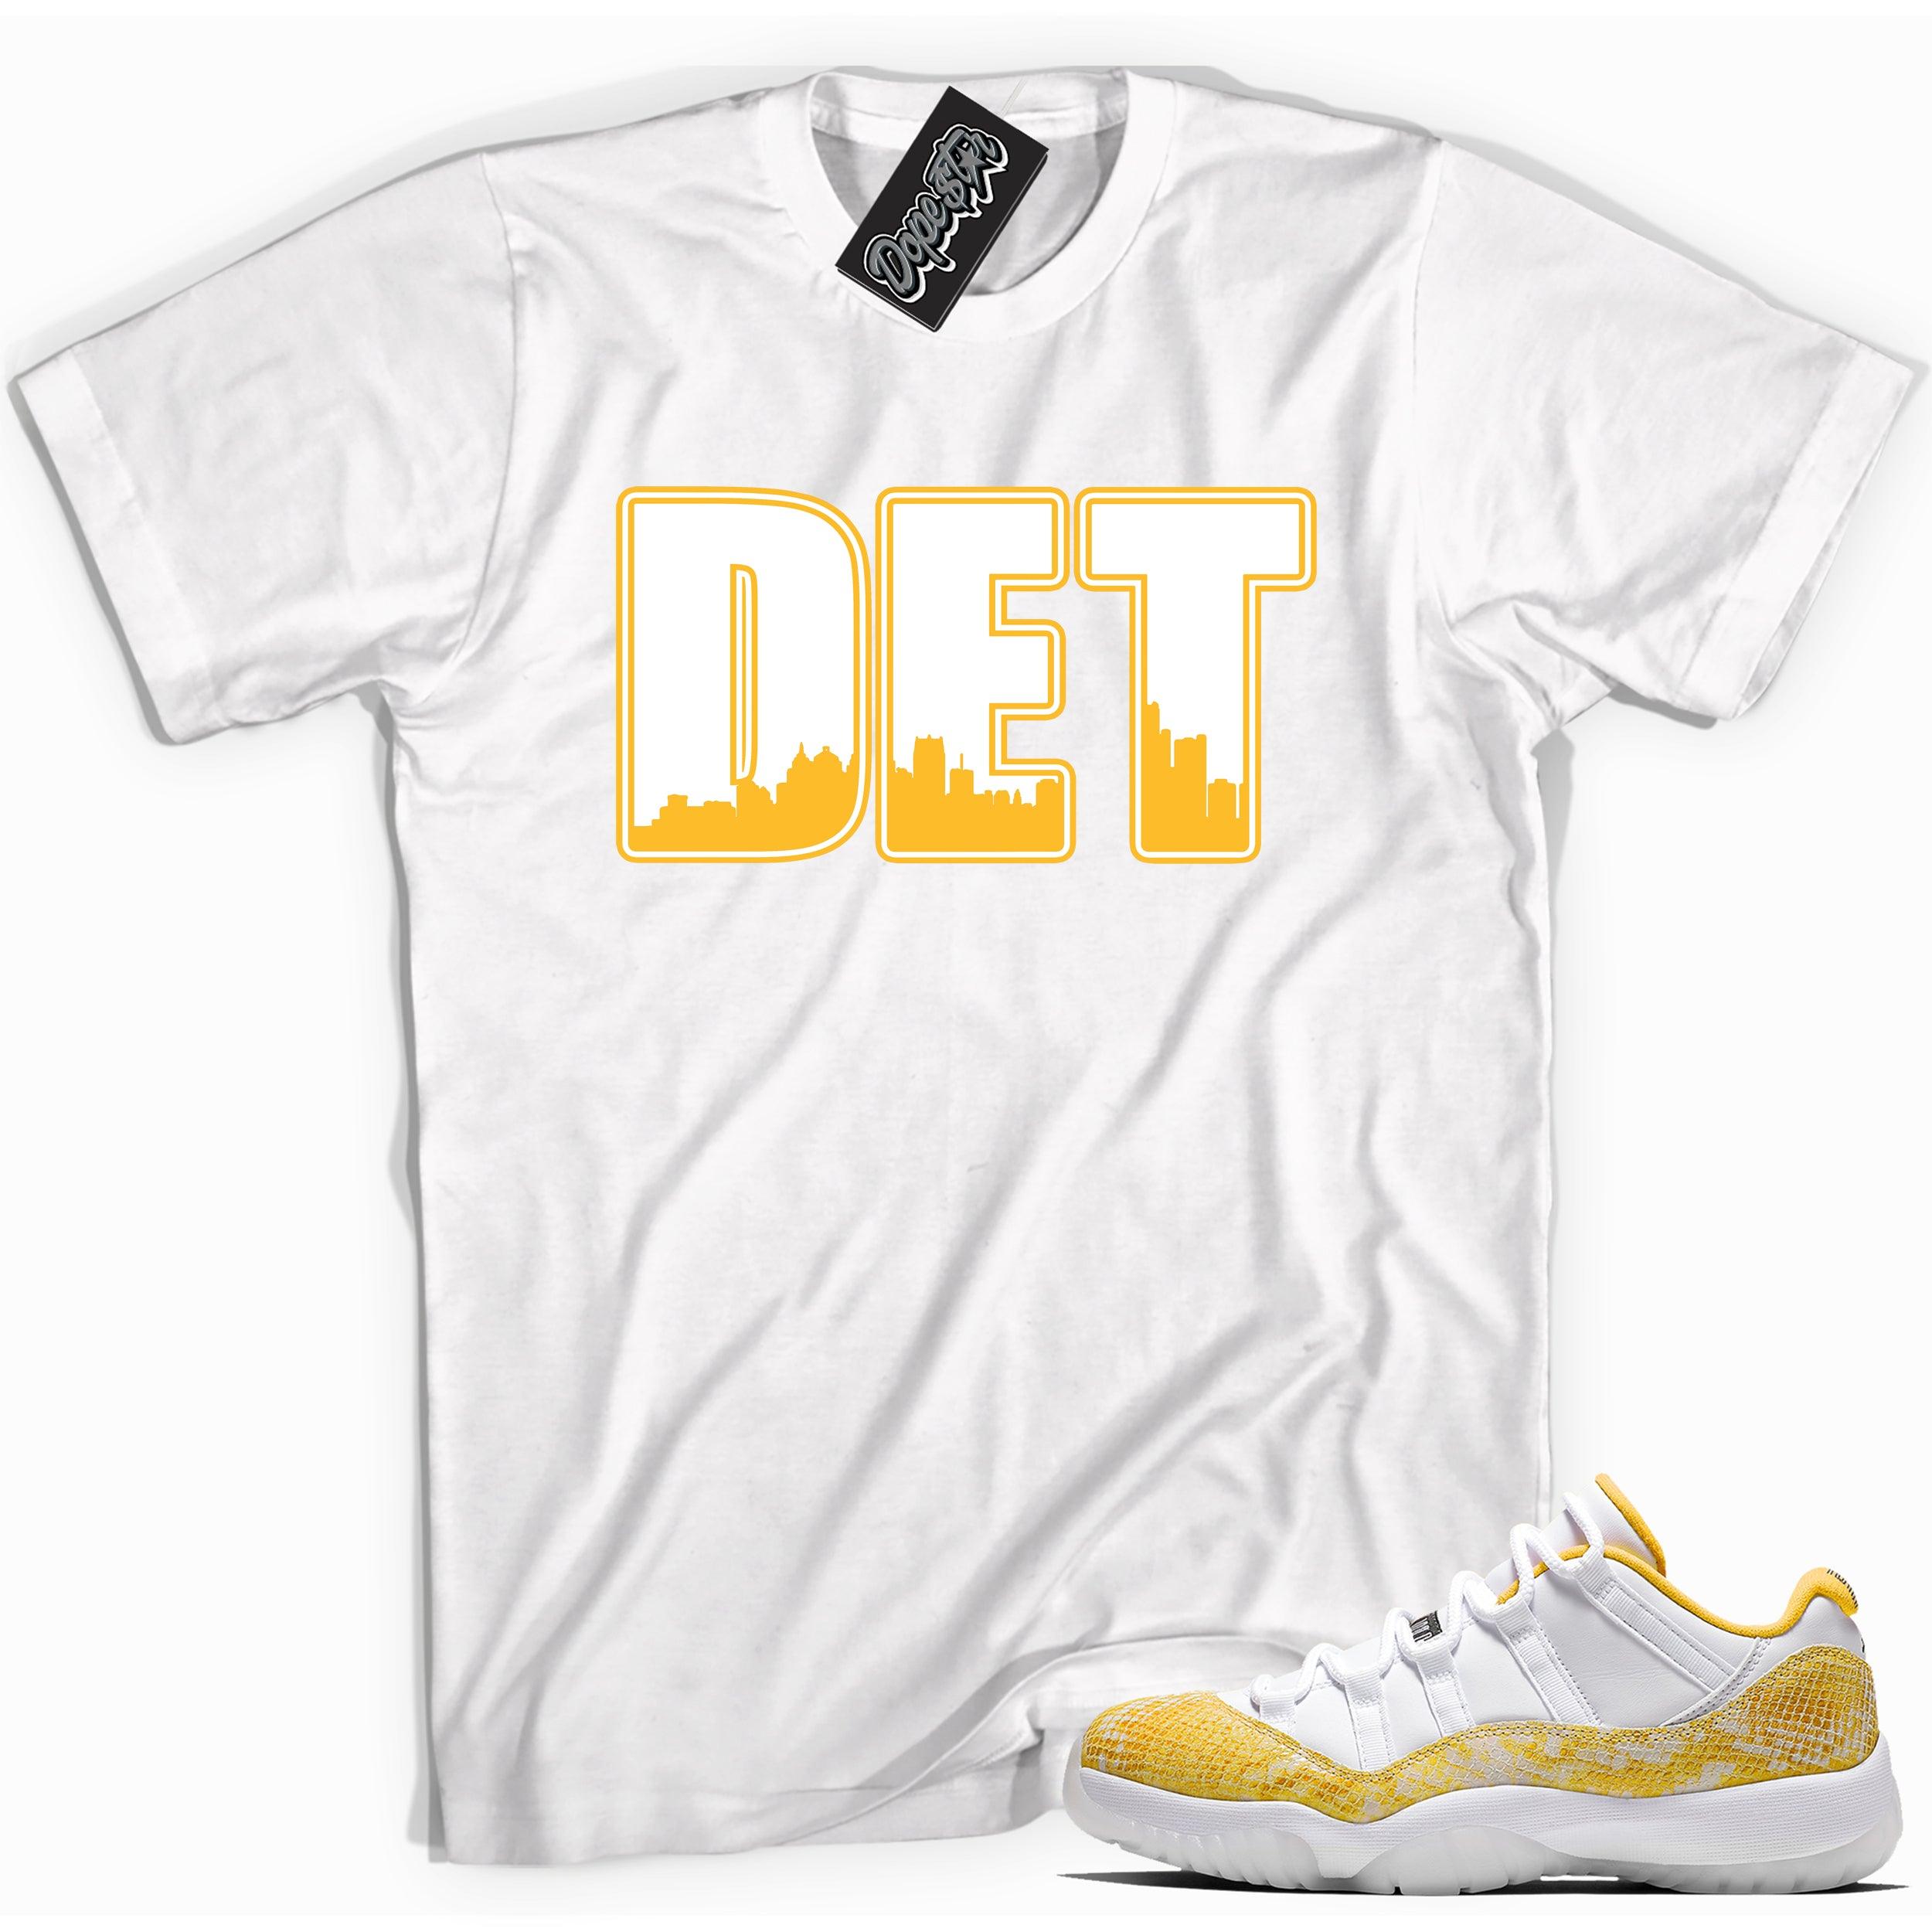 Cool white graphic tee with 'DET' print, that perfectly matches Air Jordan 11 Low Yellow Snakeskin sneakers